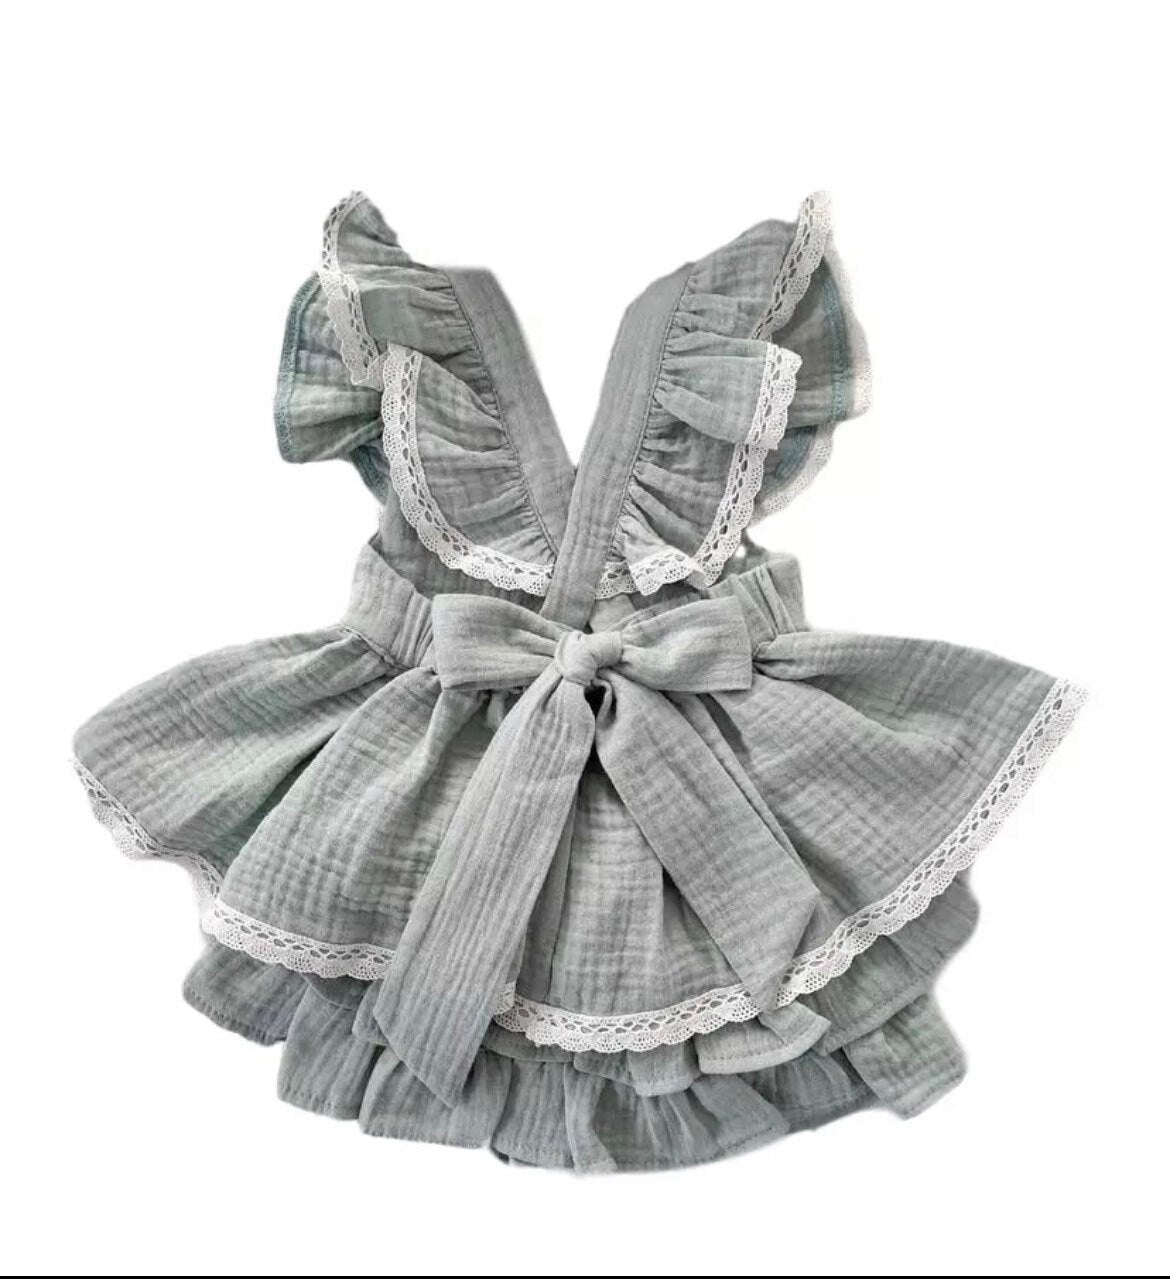 Muslin Lace Ruffle Vintage Romper Set with Bloomers.